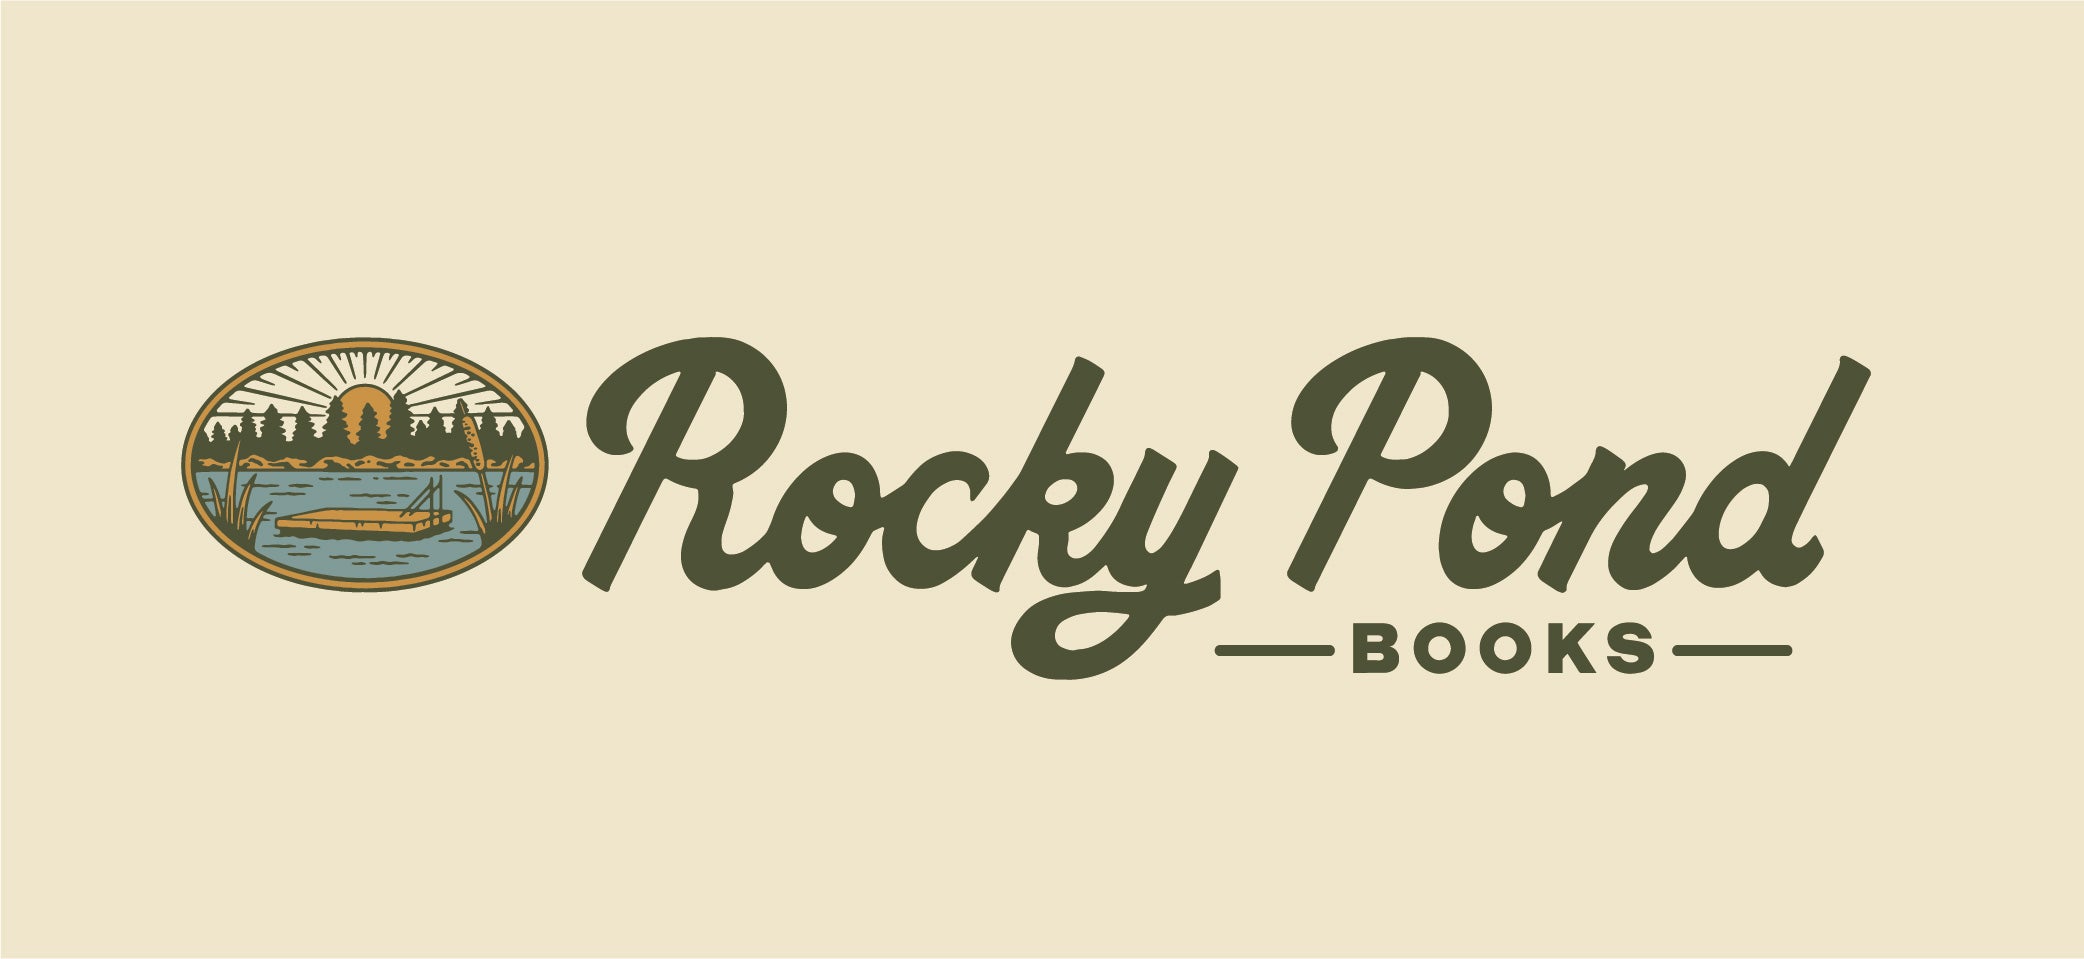 rockypond_logo_banner_withbleed